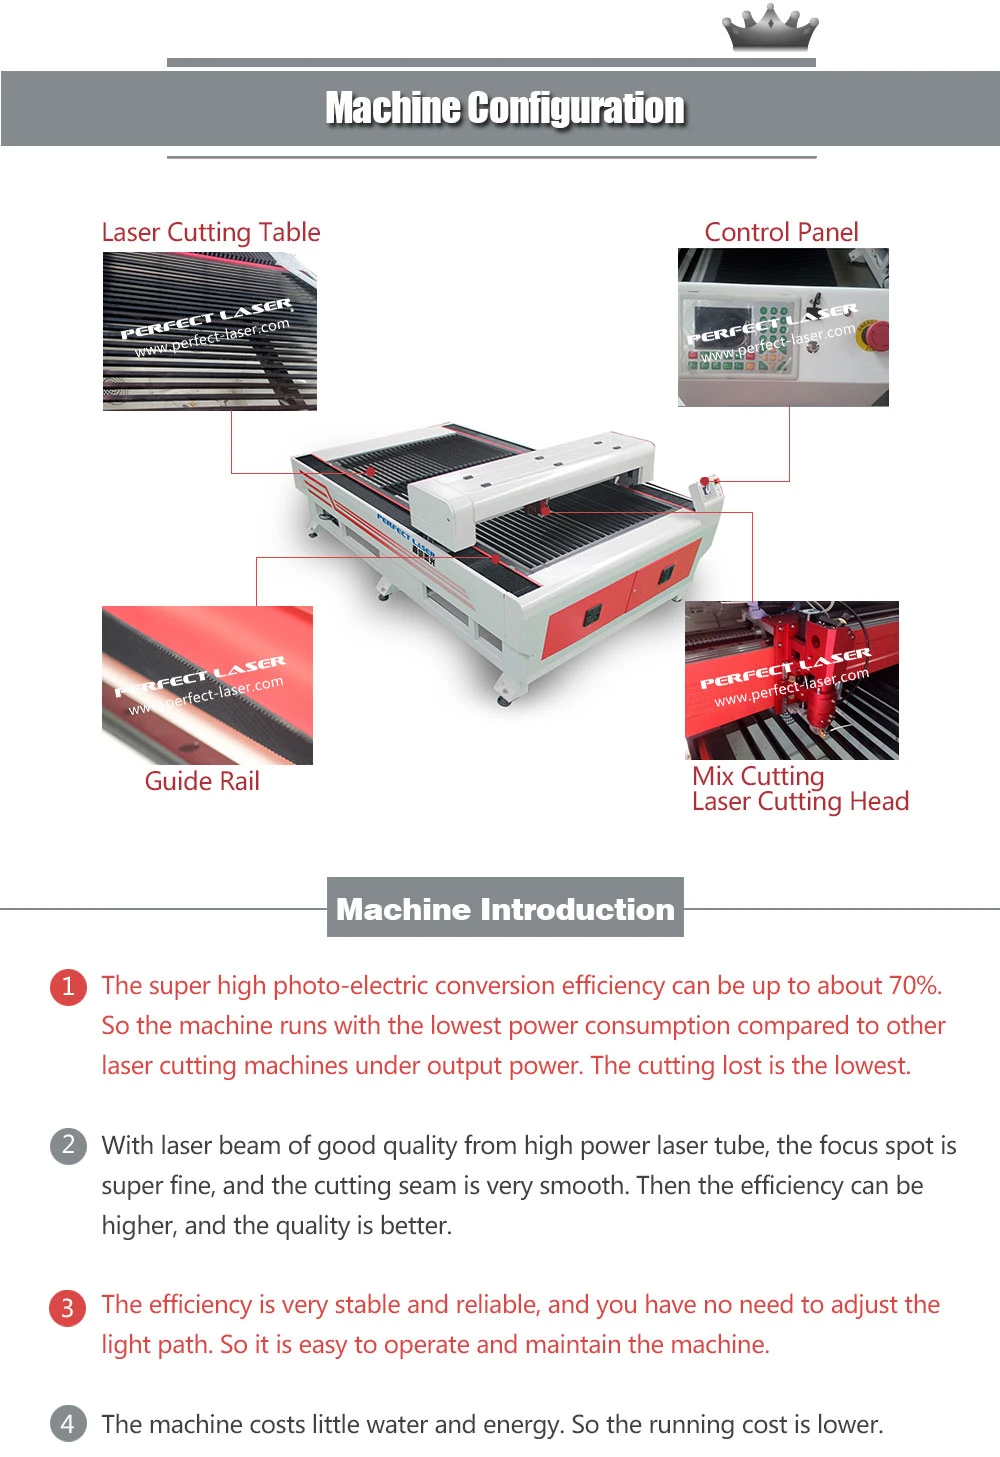 300W Stainless Steel Mixed Laser Cutting Machine